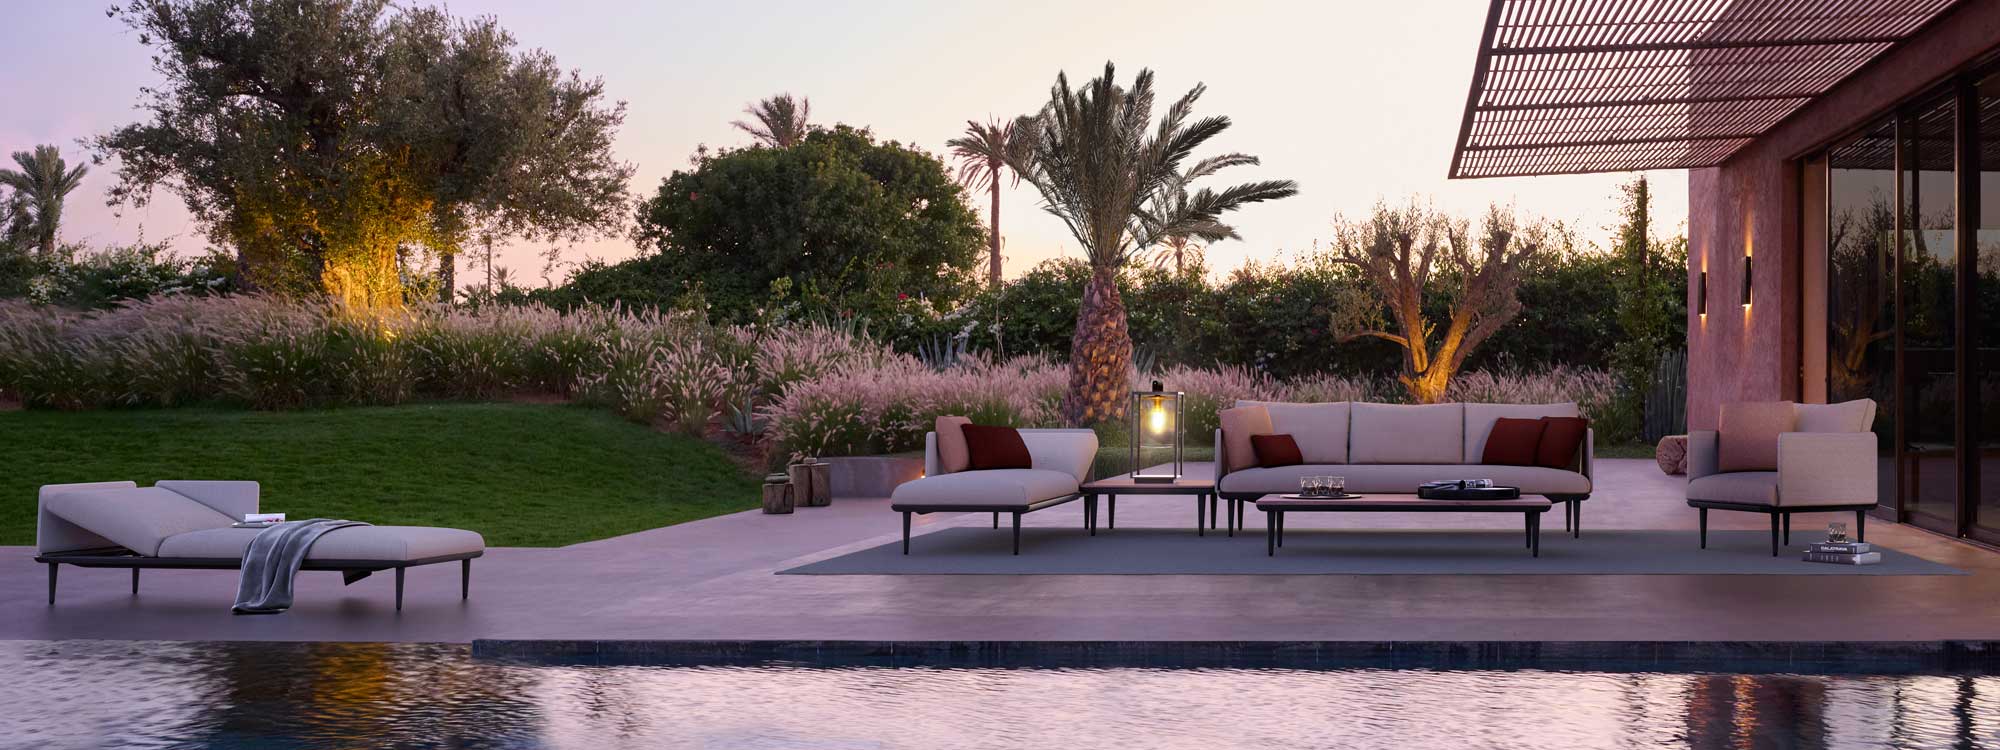 Sunset around poolside with Royal Botania Styletto modern garden sofa and Dome garden lamps